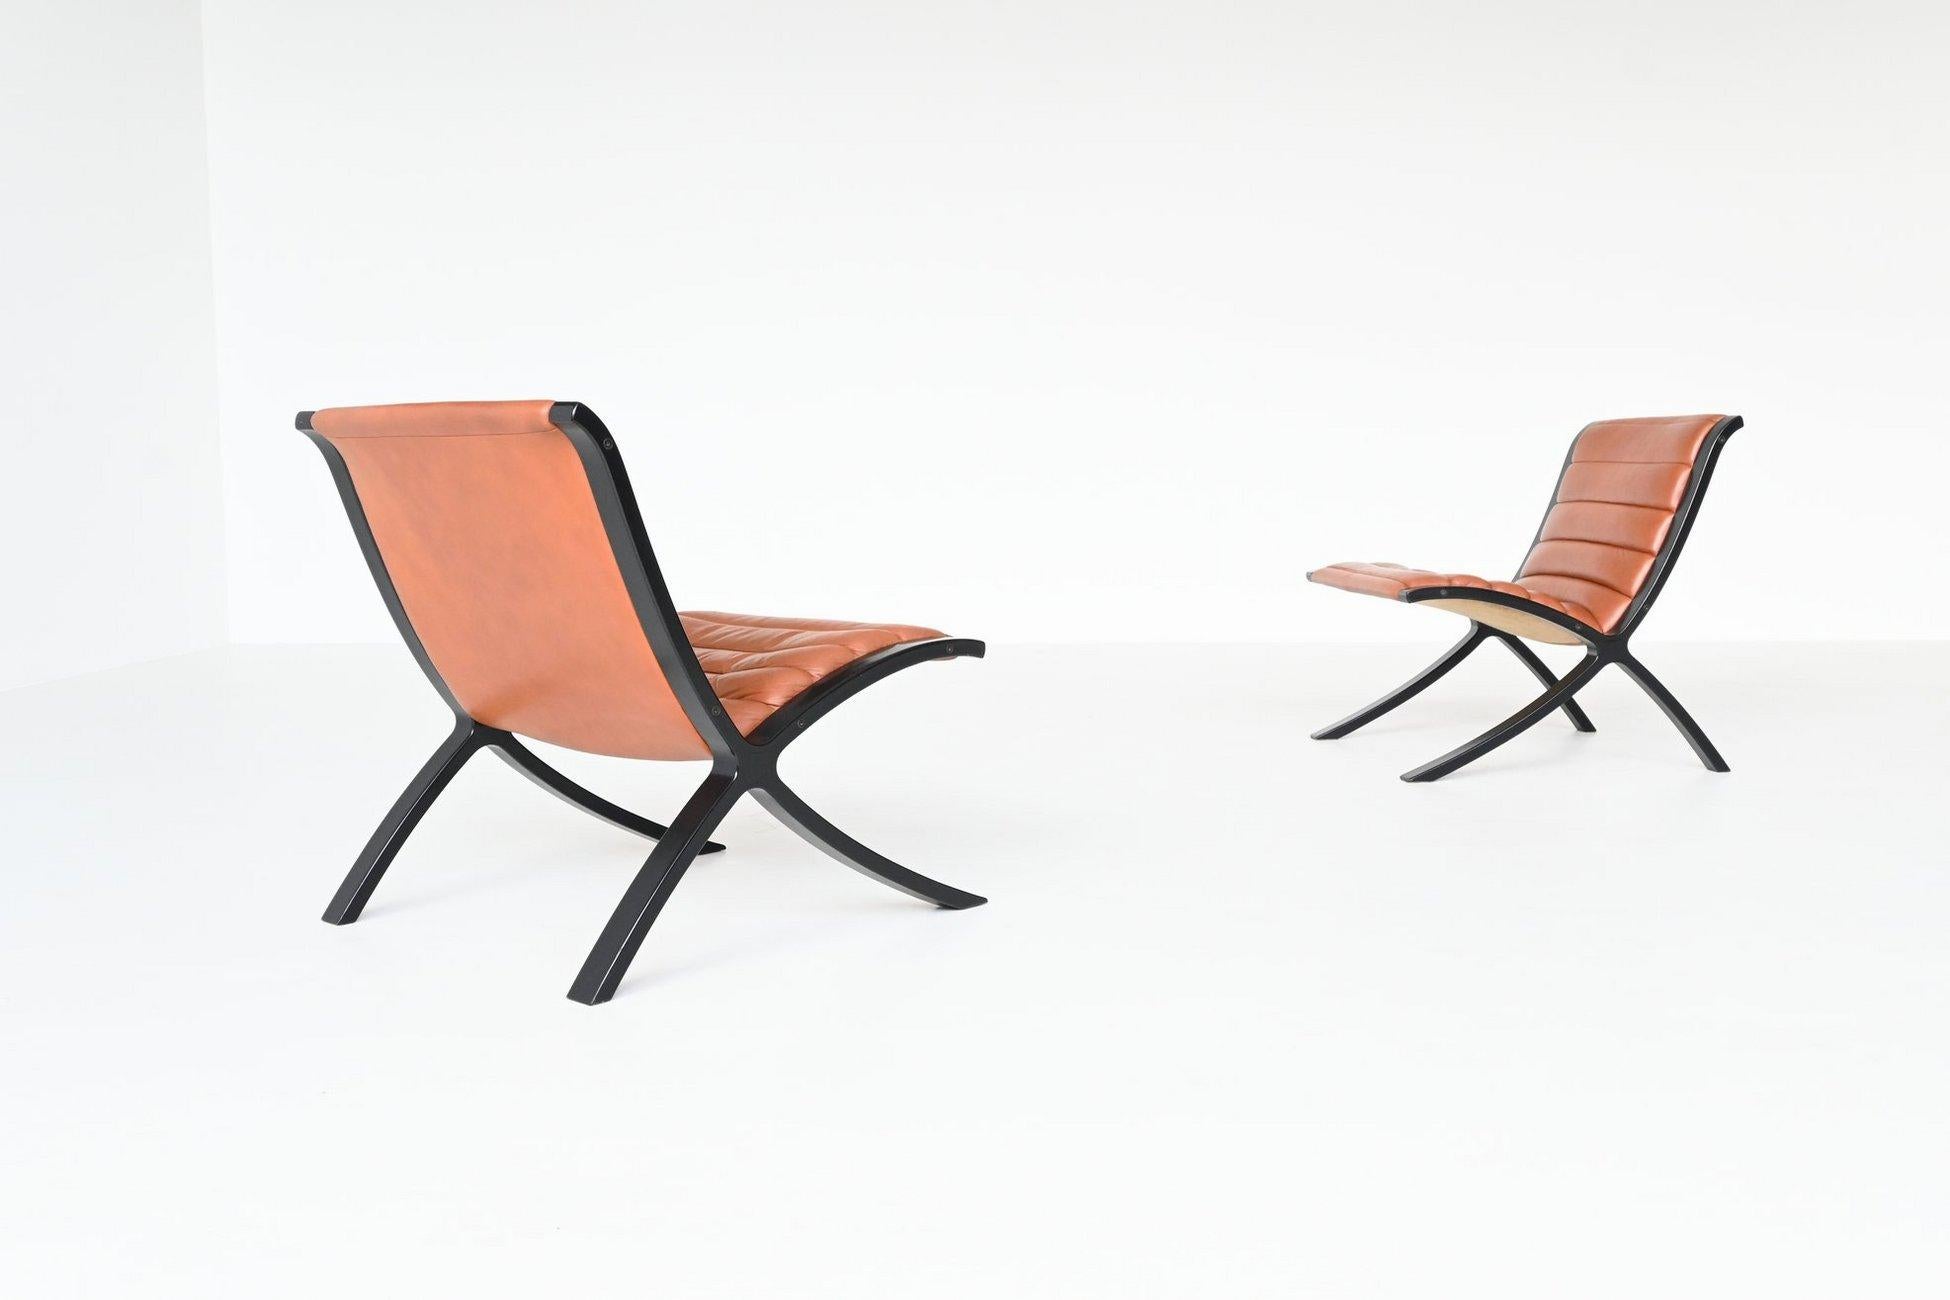 Fantastically shaped pair of lounge chairs model X-Chair designed by Peter Hvidt & Orla Molgaard-Nielsen for Fritz Hansen, Denmark 1979. These sculptural chairs feature a black lacquered beech plywood frame with padded brown leather upholstery. The